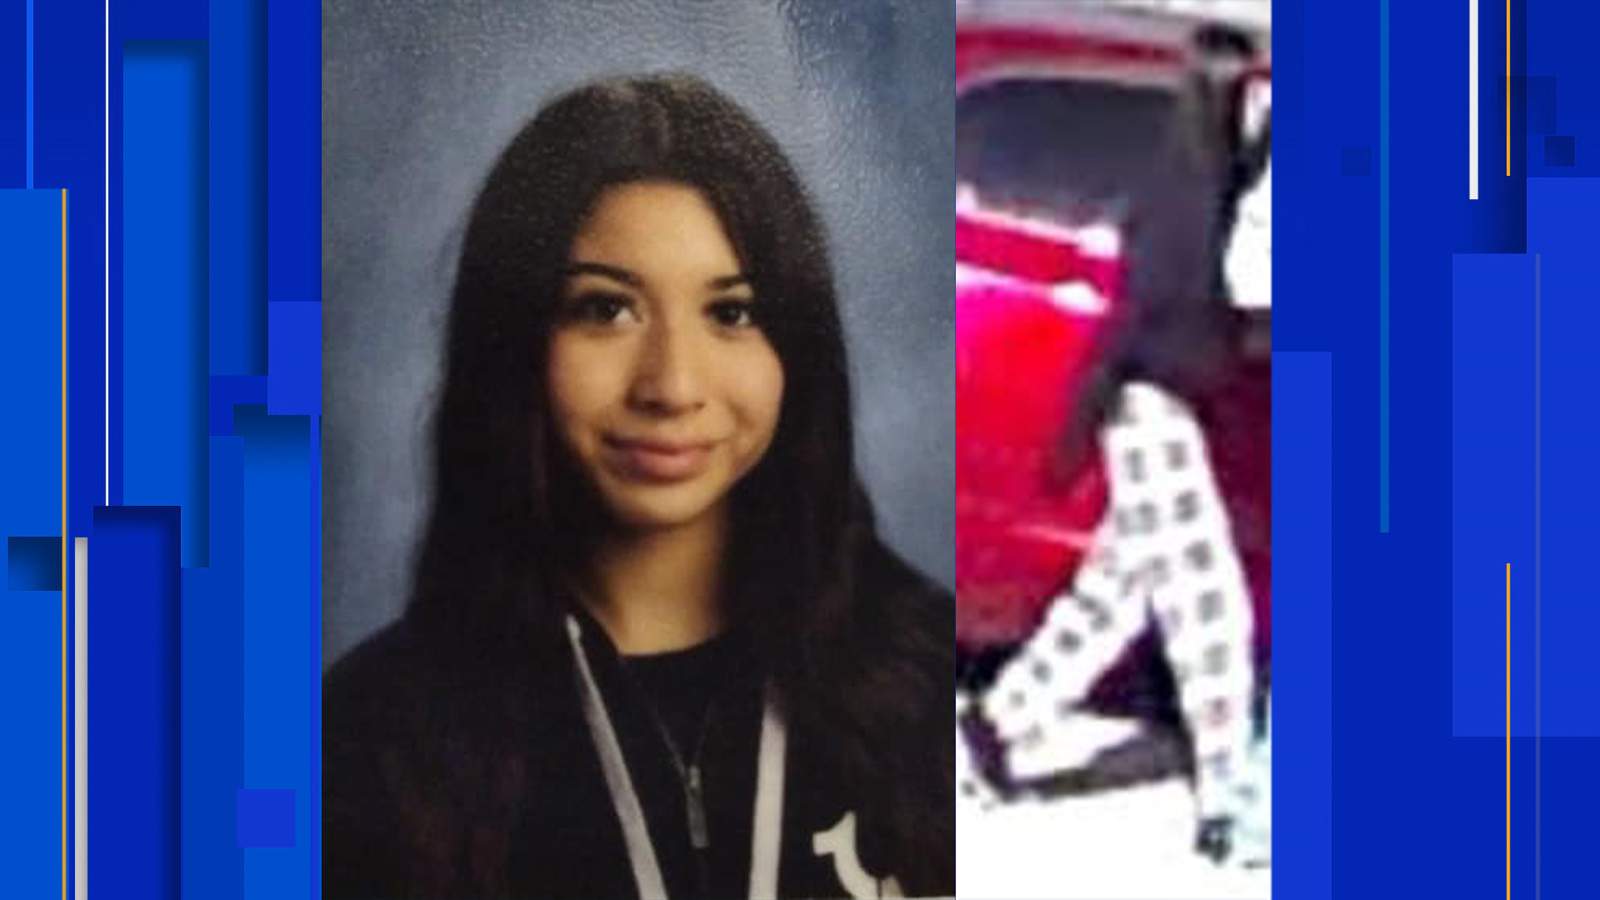 BCSO searching for 14-year-old girl who disappeared in North Bexar County